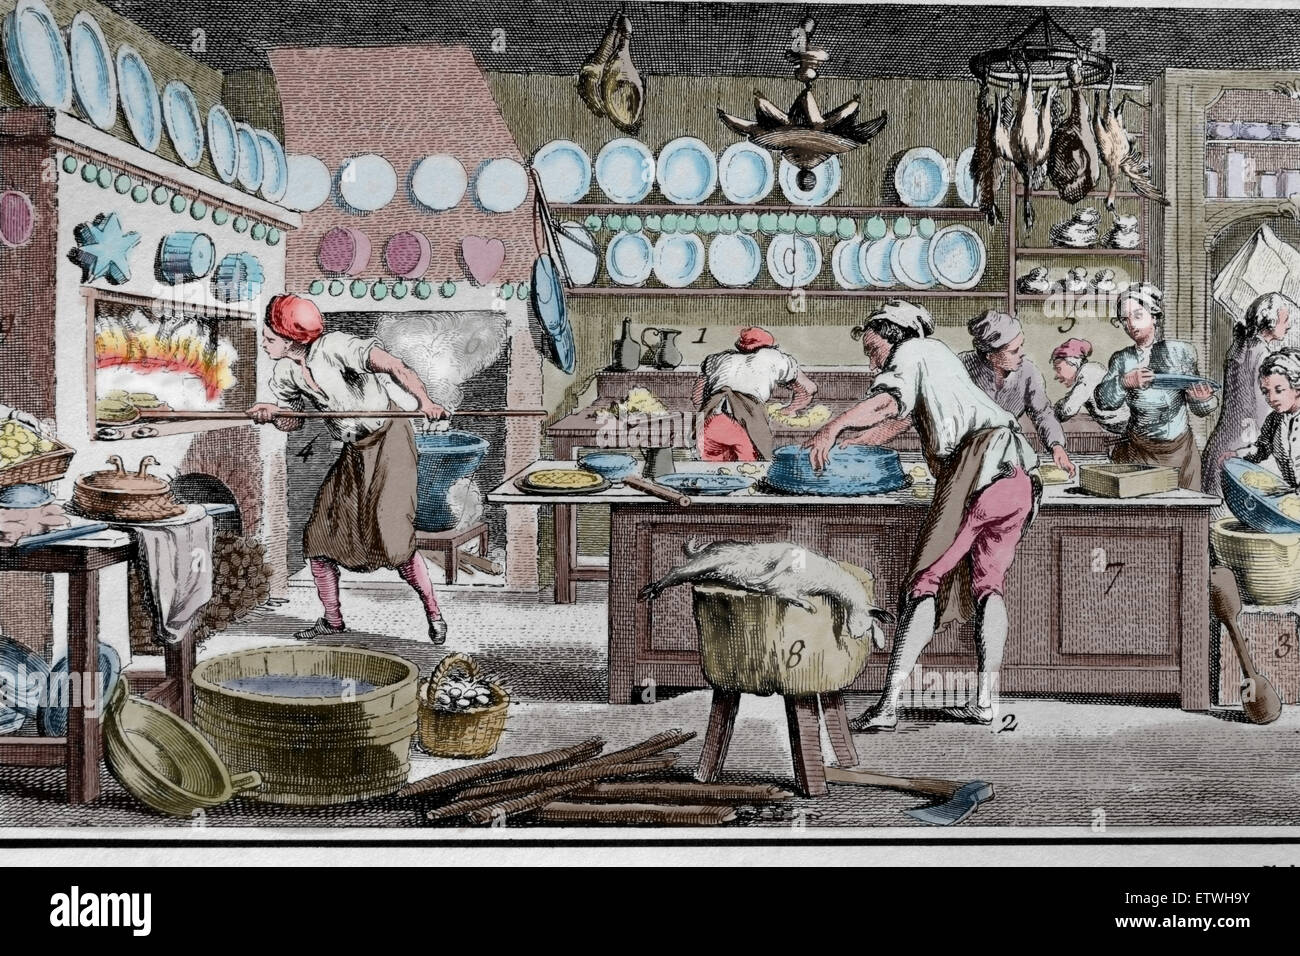 Illustration. Plate 450. The Patisserie.  Encyclopedie. Edited by Denis Diderot and Jean Le Rond d'Alembert. 18th c. Engraving. Stock Photo